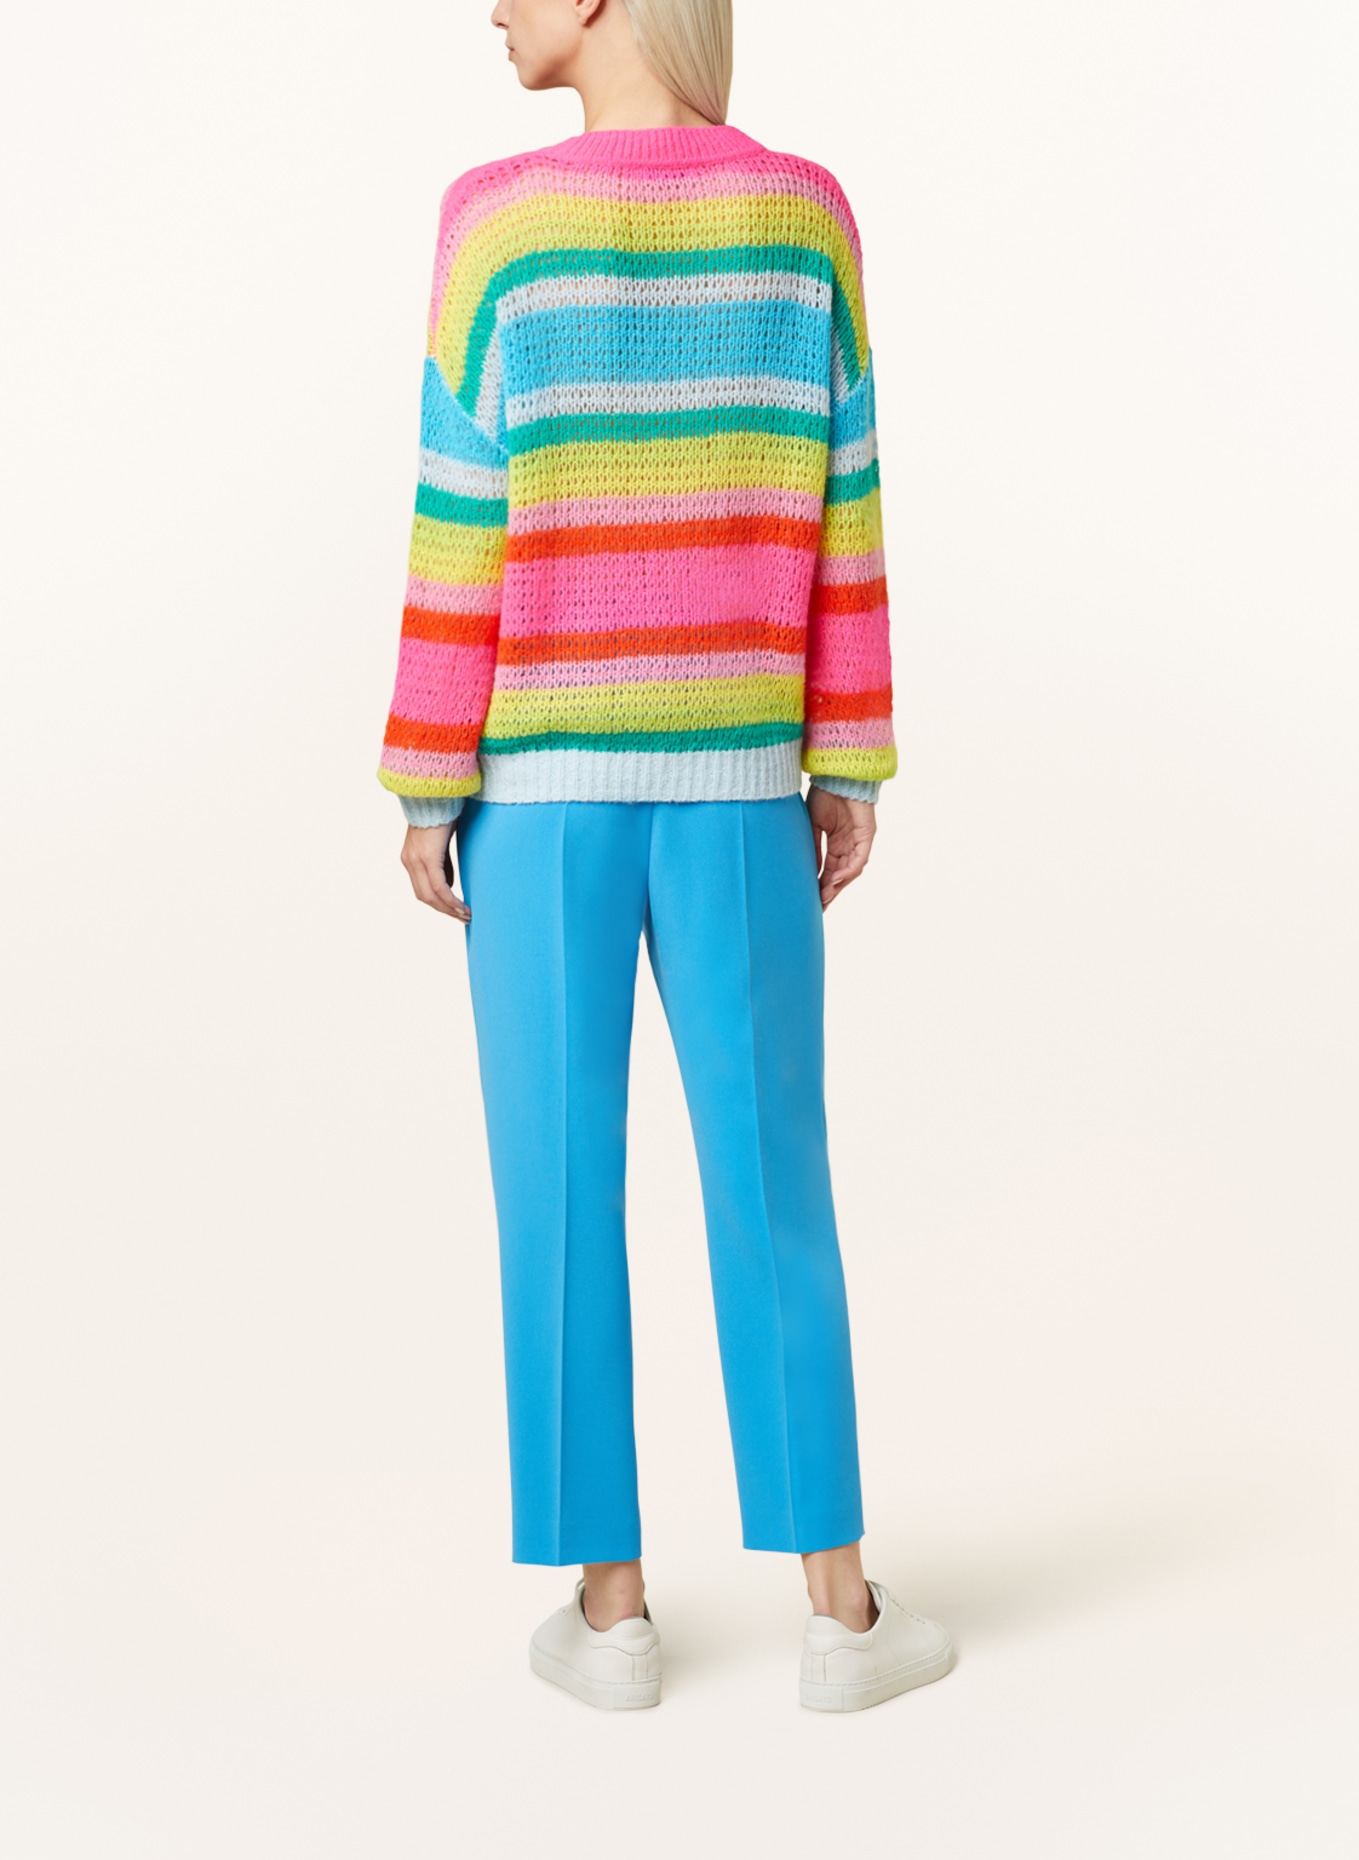 Princess GOES HOLLYWOOD Sweater, Color: NEON PINK/ NEON BLUE/ GREEN (Image 3)